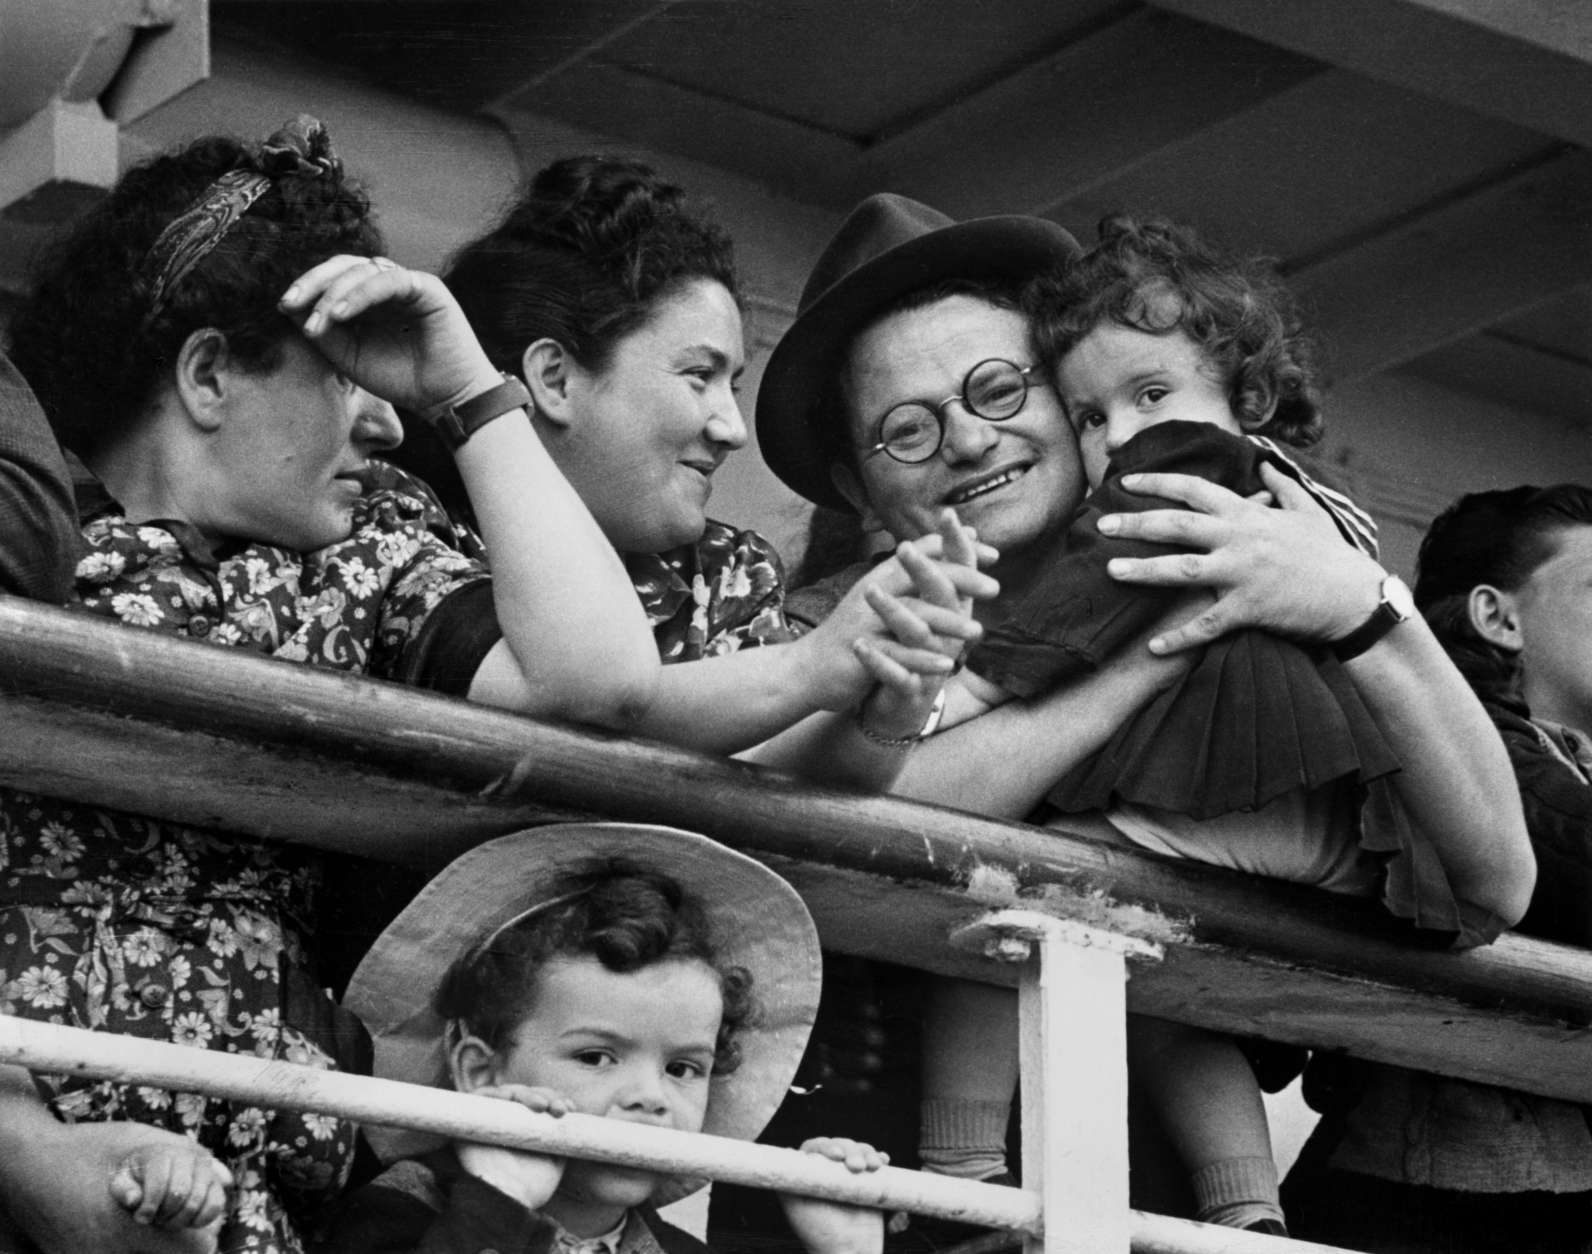 Robert Capa, [European immigrants gathered on the railing of a boat arriving in port, Haifa, Israel], May-June 1949
©International Center of Photography/Magnum Photos 